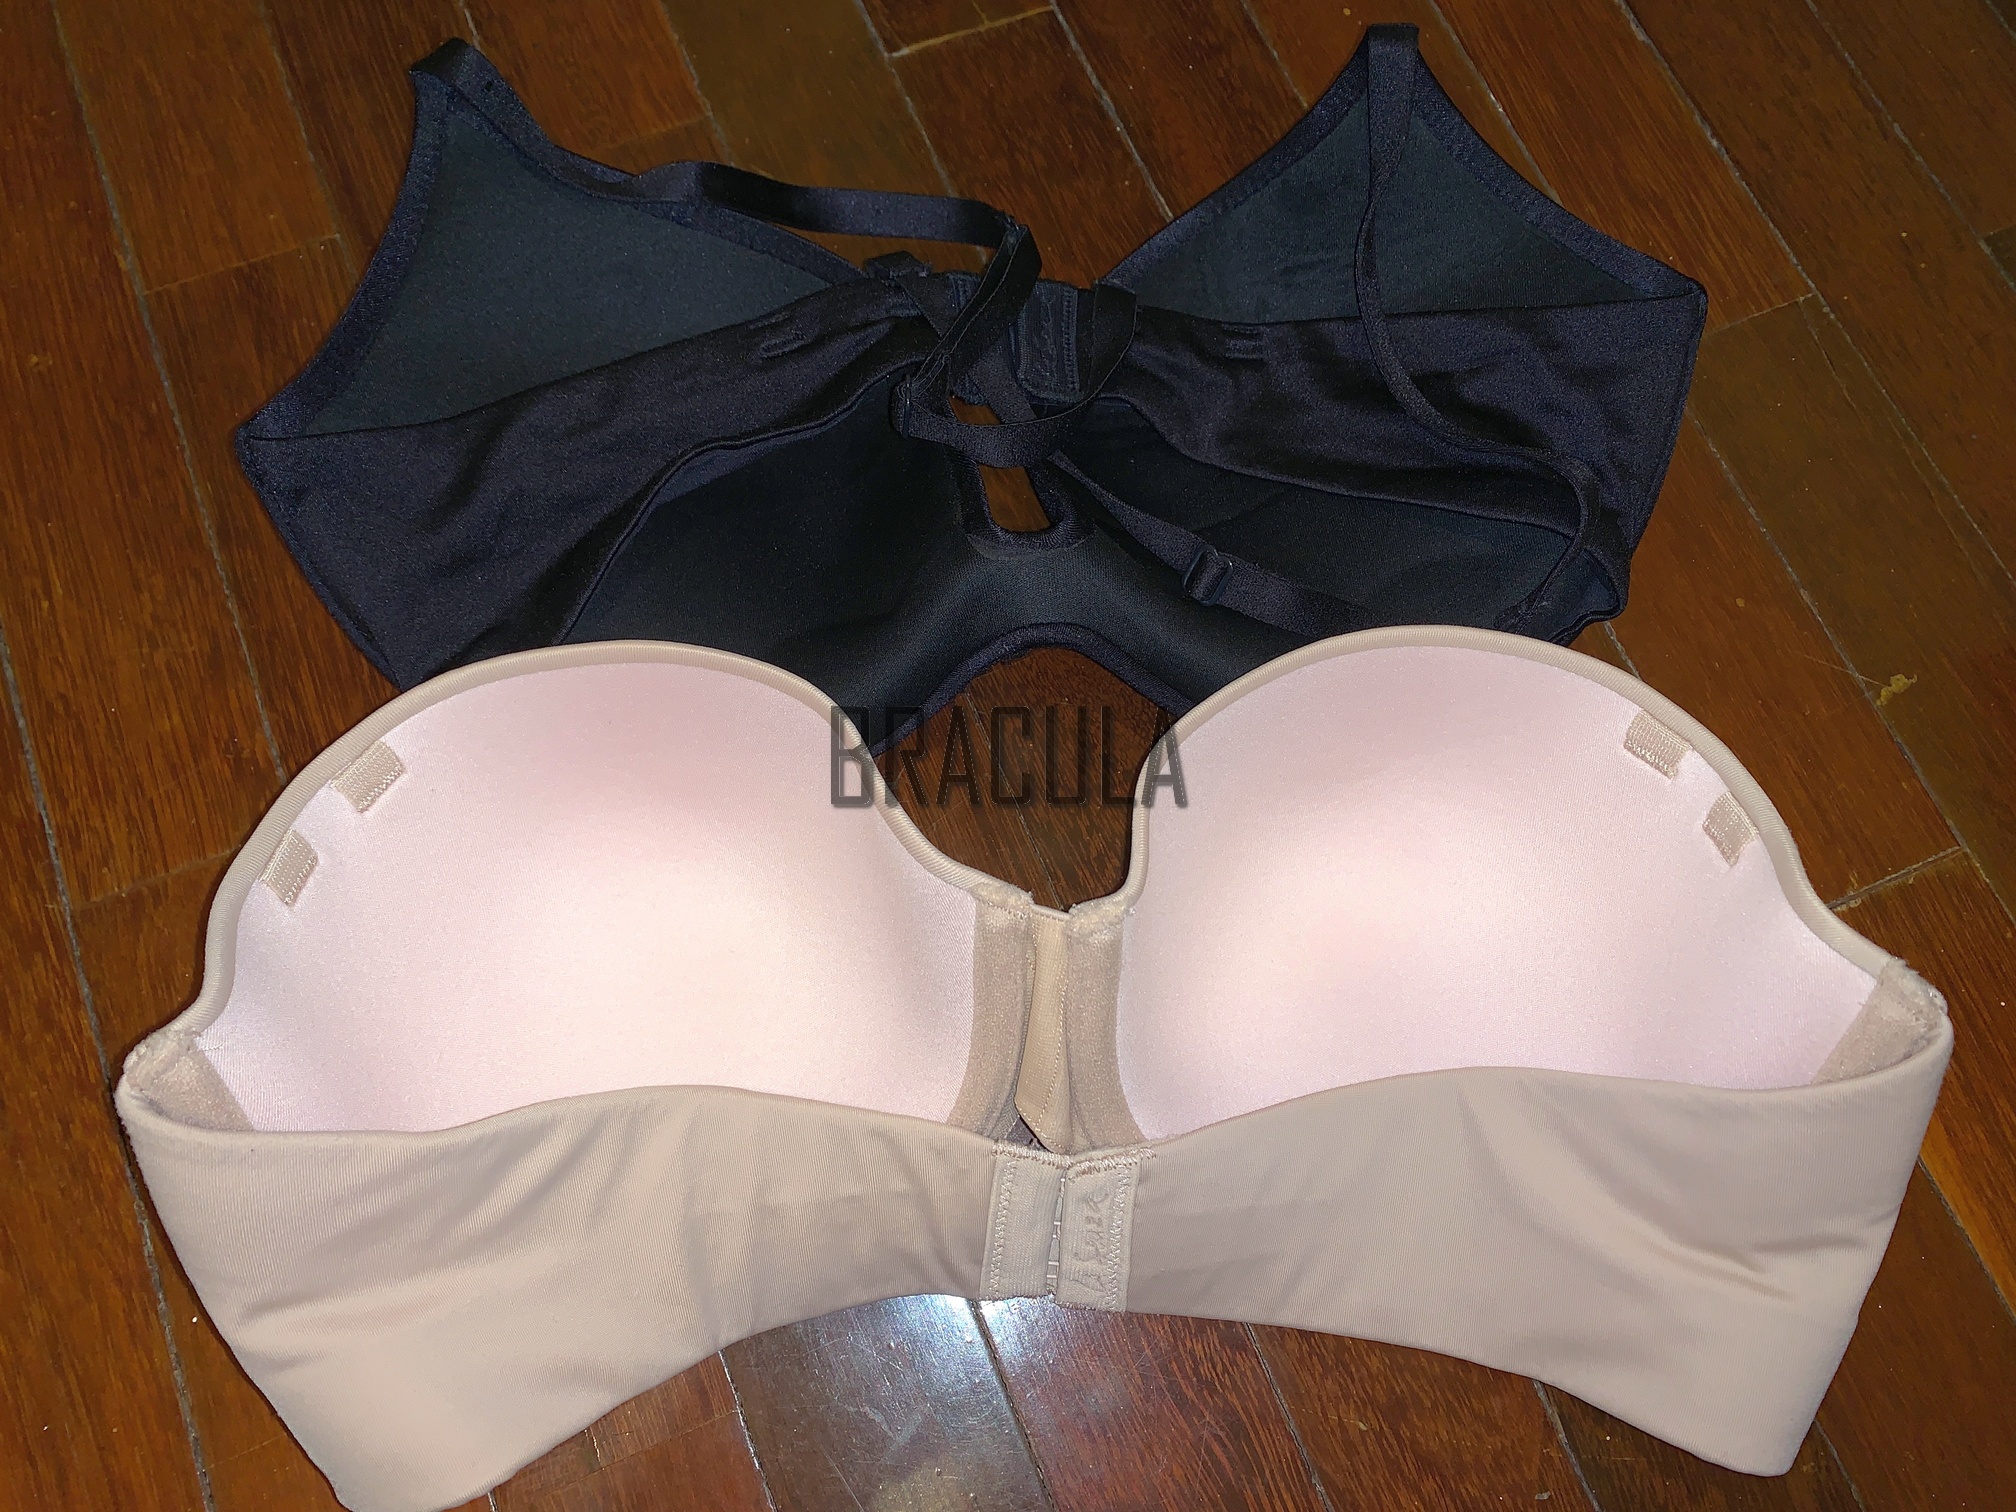 Bracula on X: Since you guys like D cup bras so much, here are